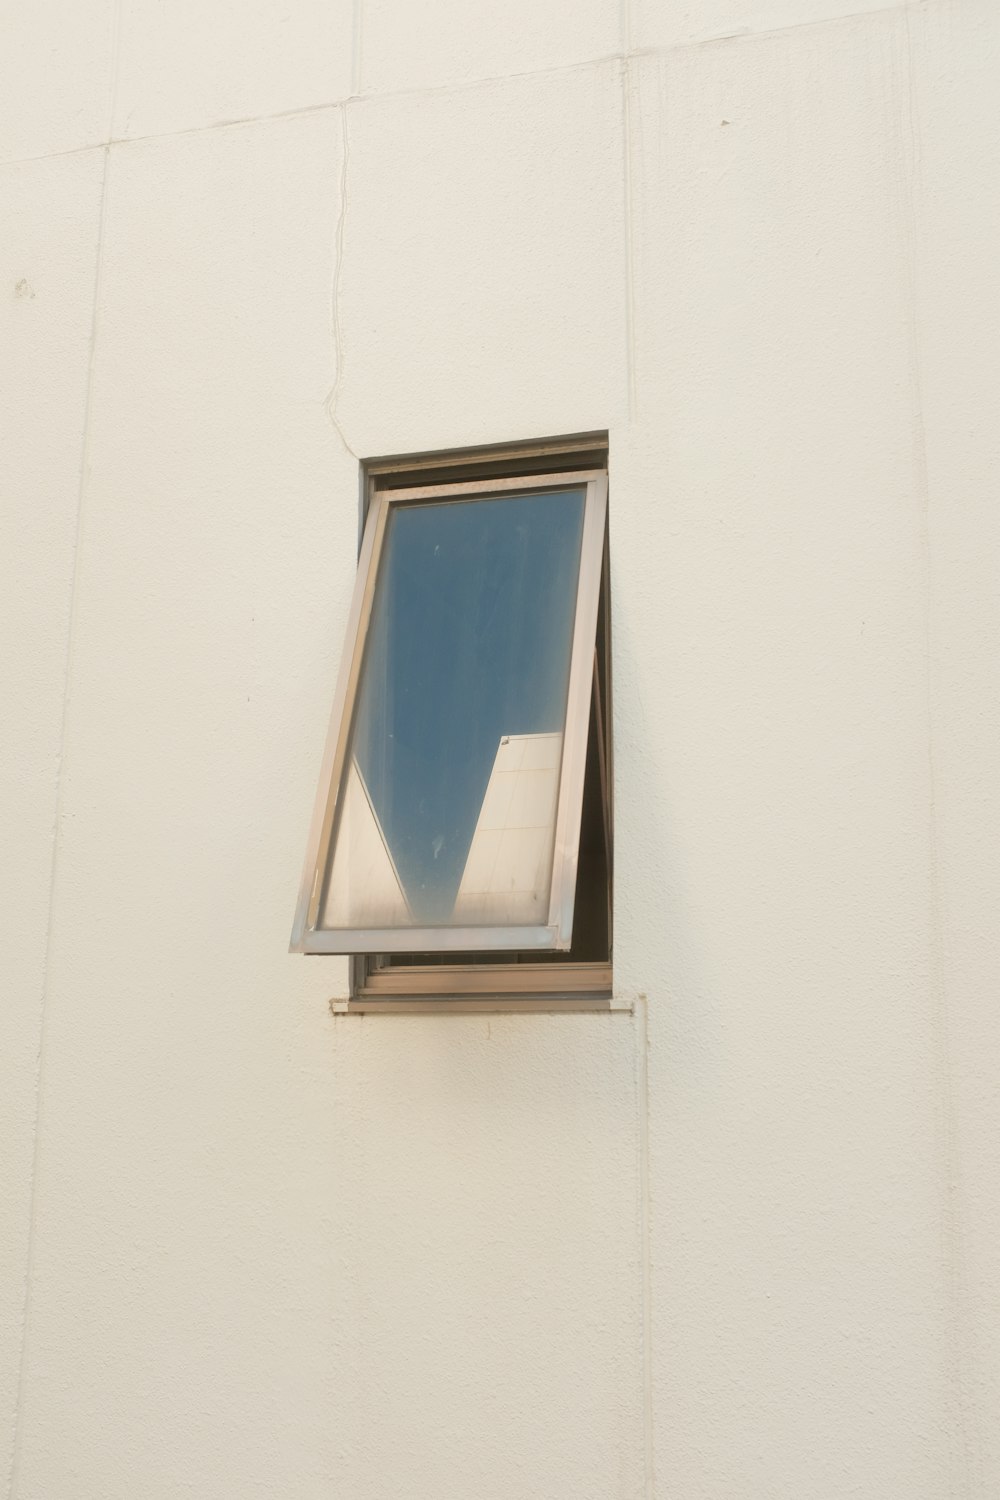 a window on the side of a building